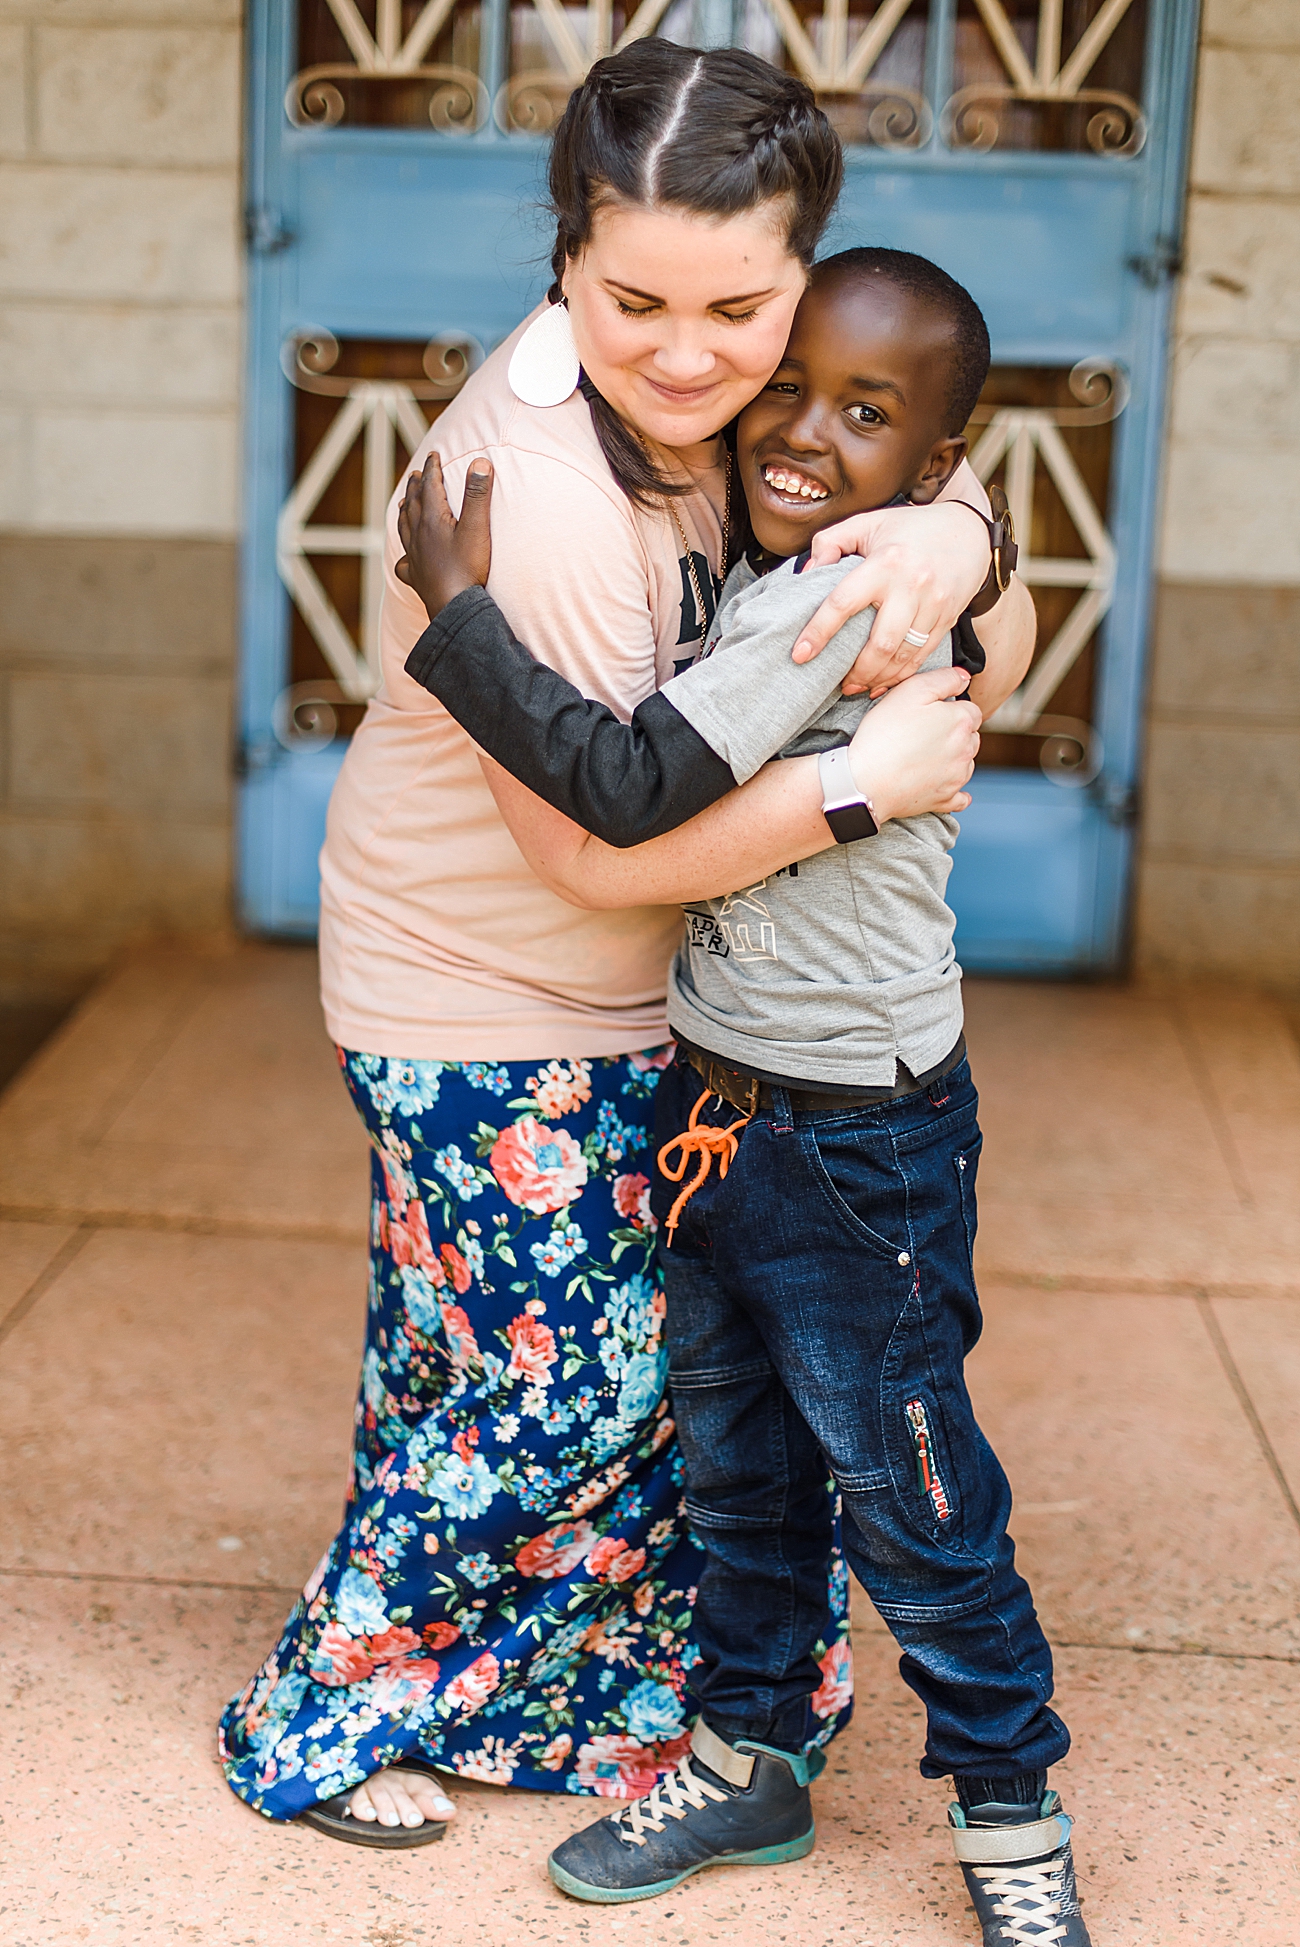 vA Child Needs You... | Sponsor a Child in Kenya with Compassion International (3)